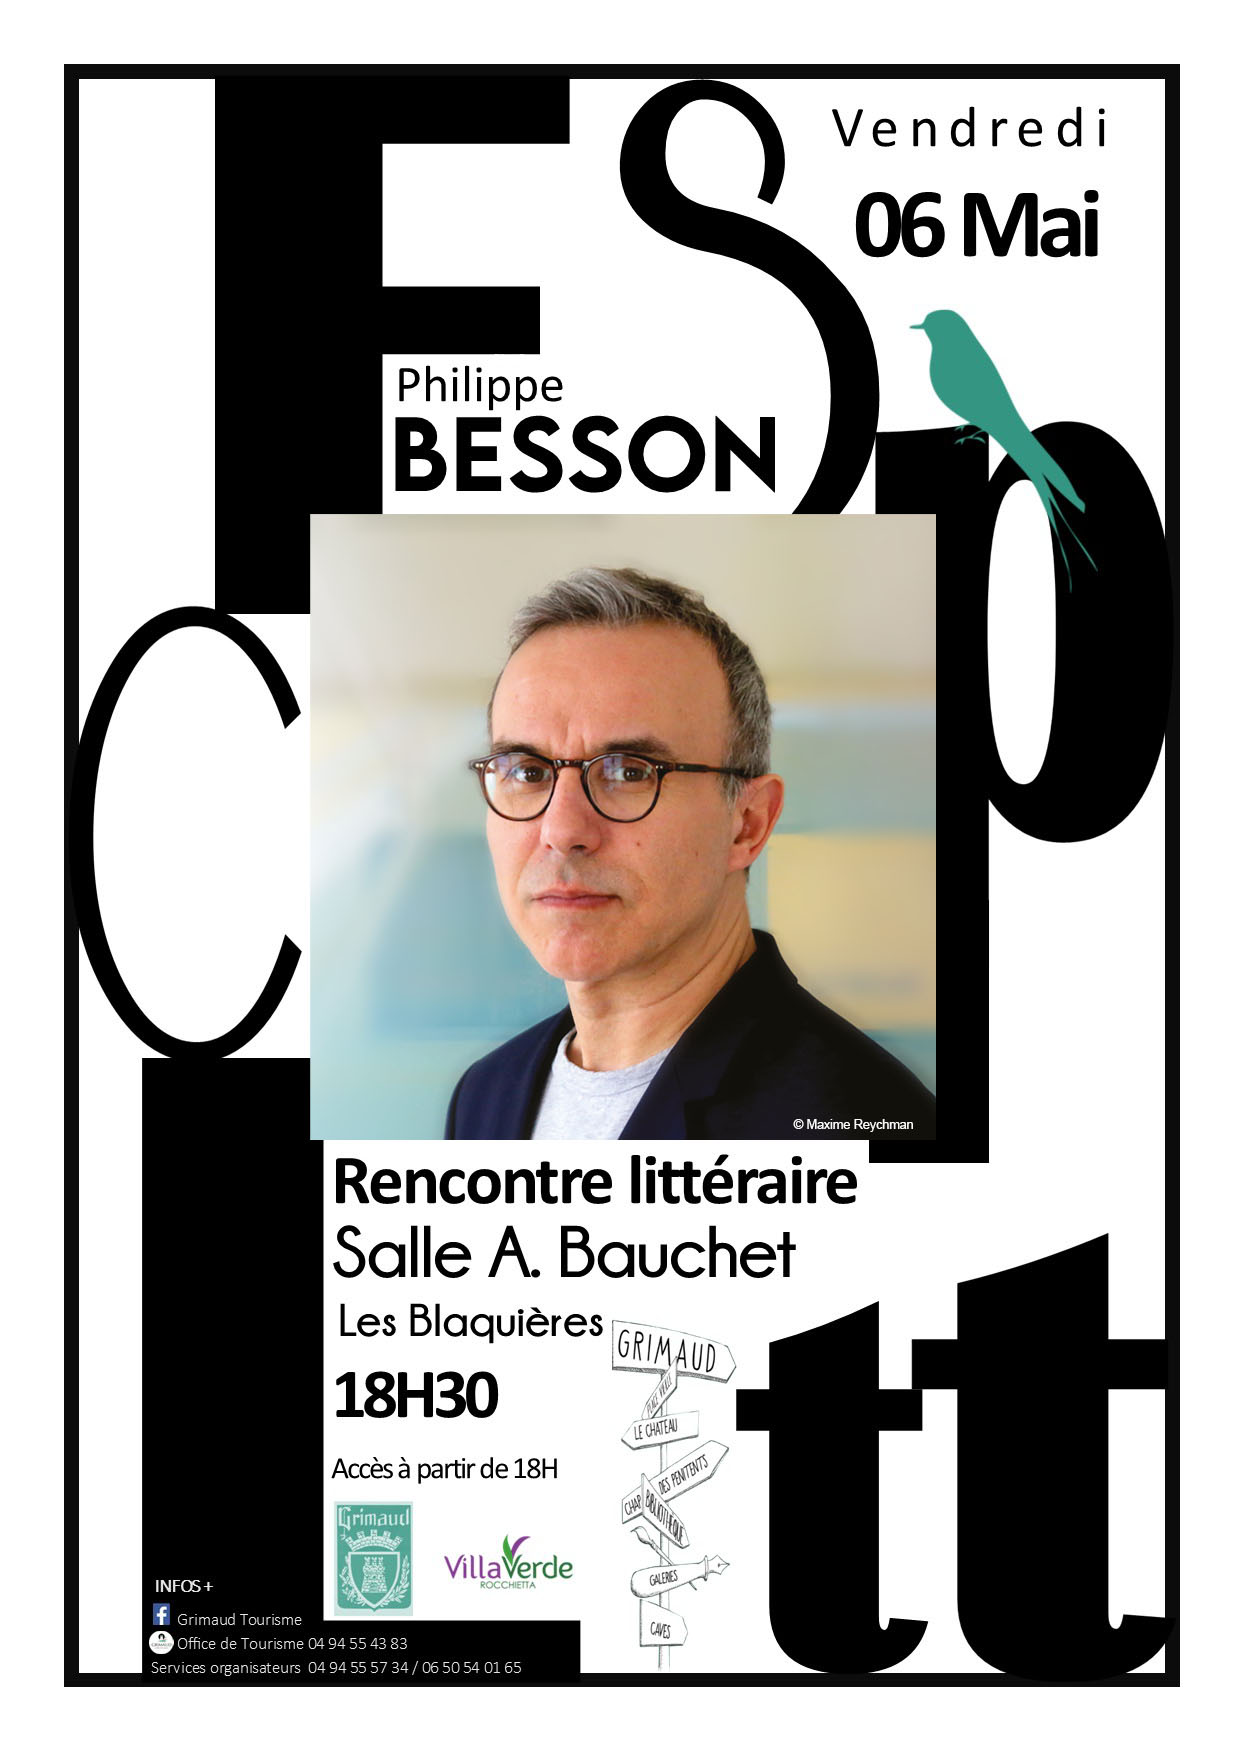 Friday 06 May 2022 - Literary getaway with Philippe BESSON